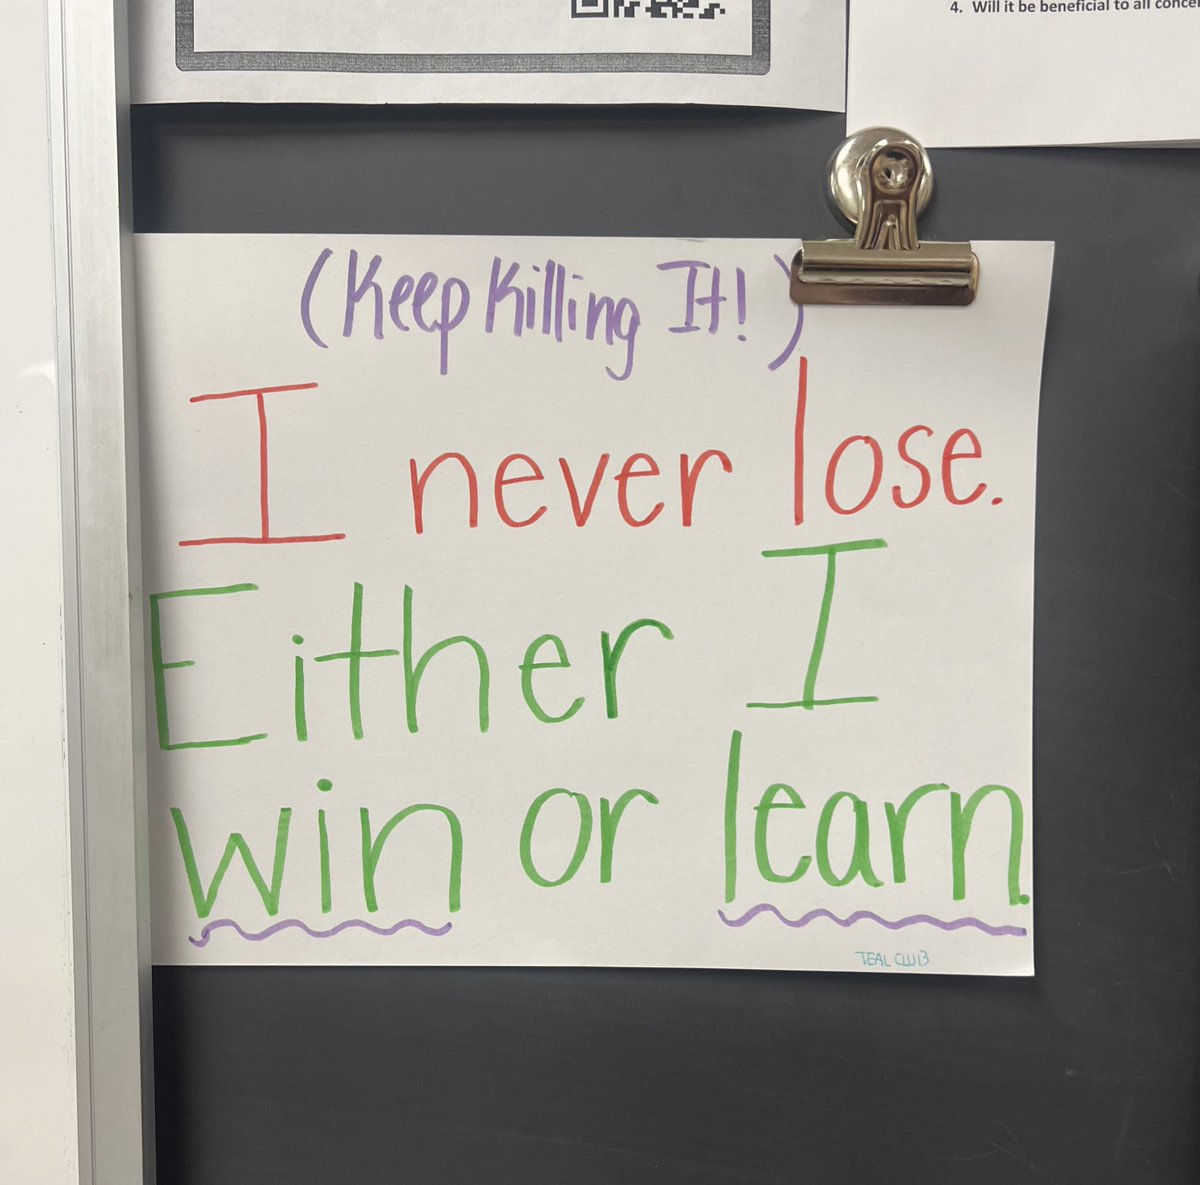 Seen in a high school English classroom this morning 💪🏼